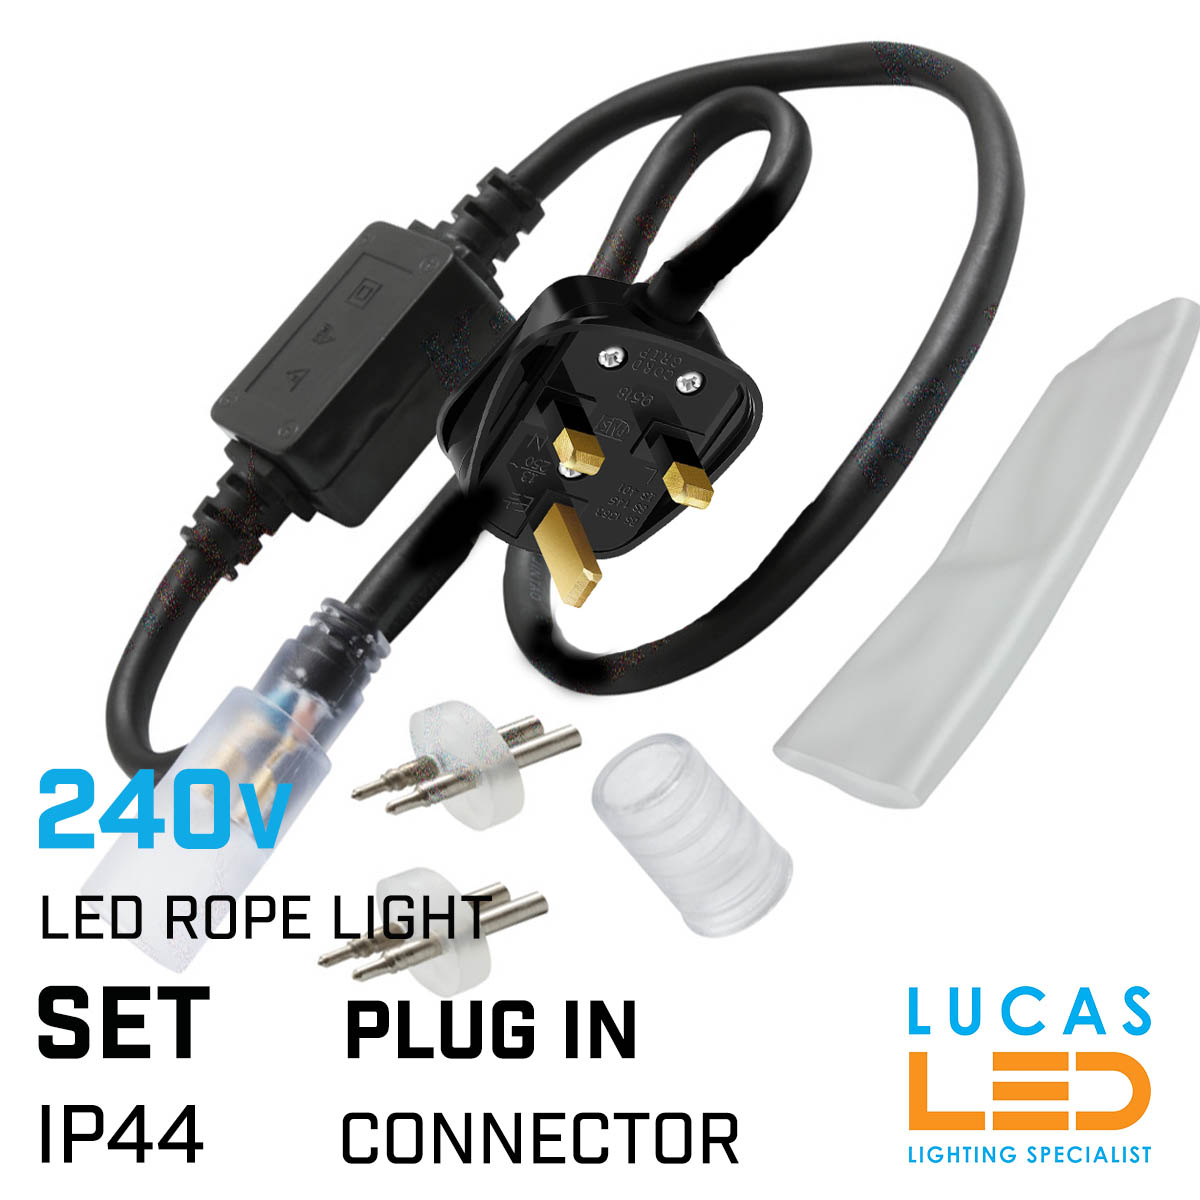 Power Supply 220V / 240V AC - plug in - SET Connection Cable for decorative LED Rope Lights 